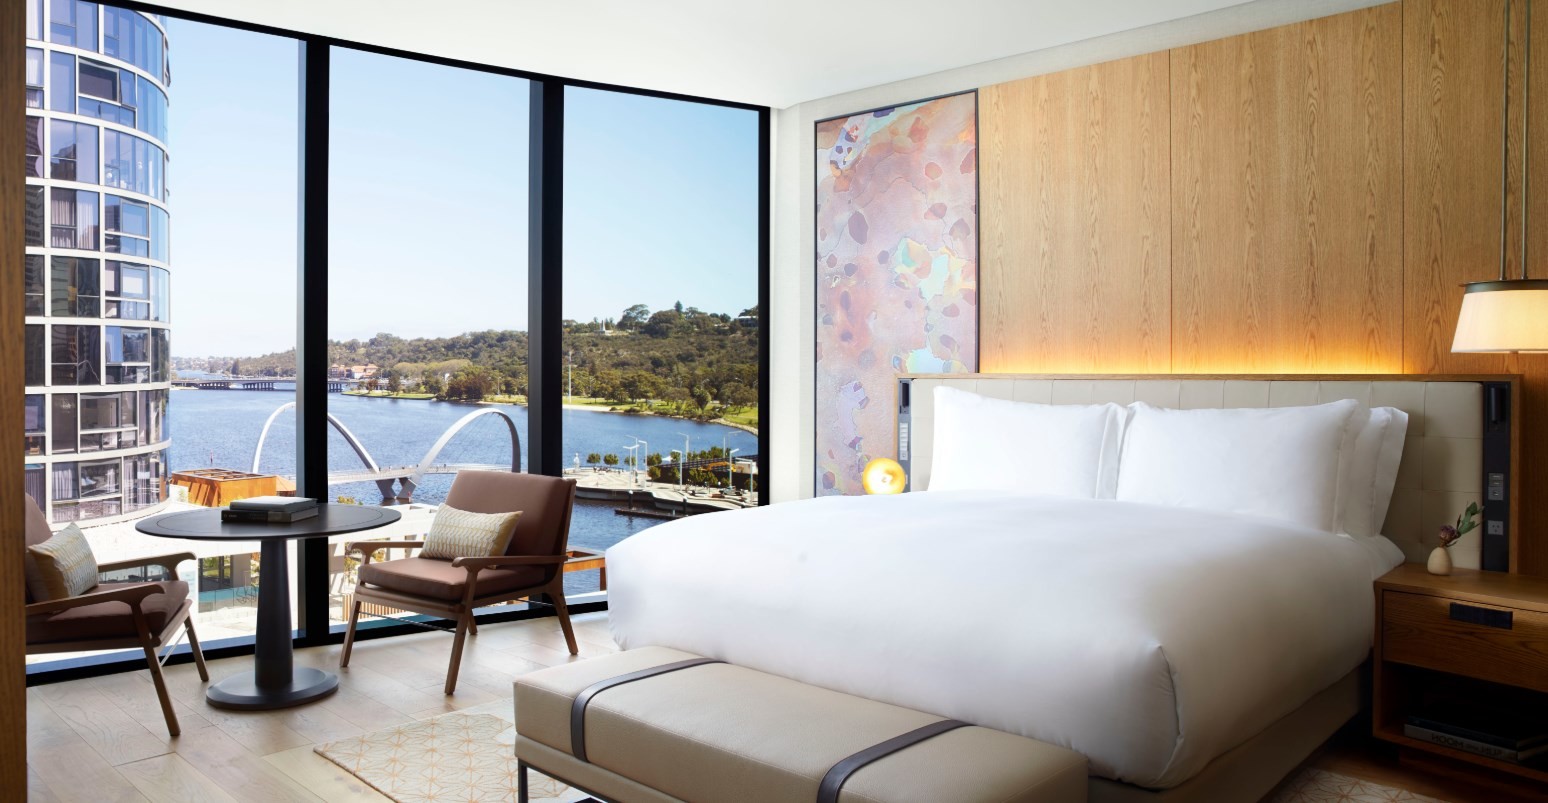 news-main-the-ritz-carlton-debuts-its-100th-hotel-bringing-the-iconic-brand-to-the-capital-of-western-australia-perth.1574317103.jpg